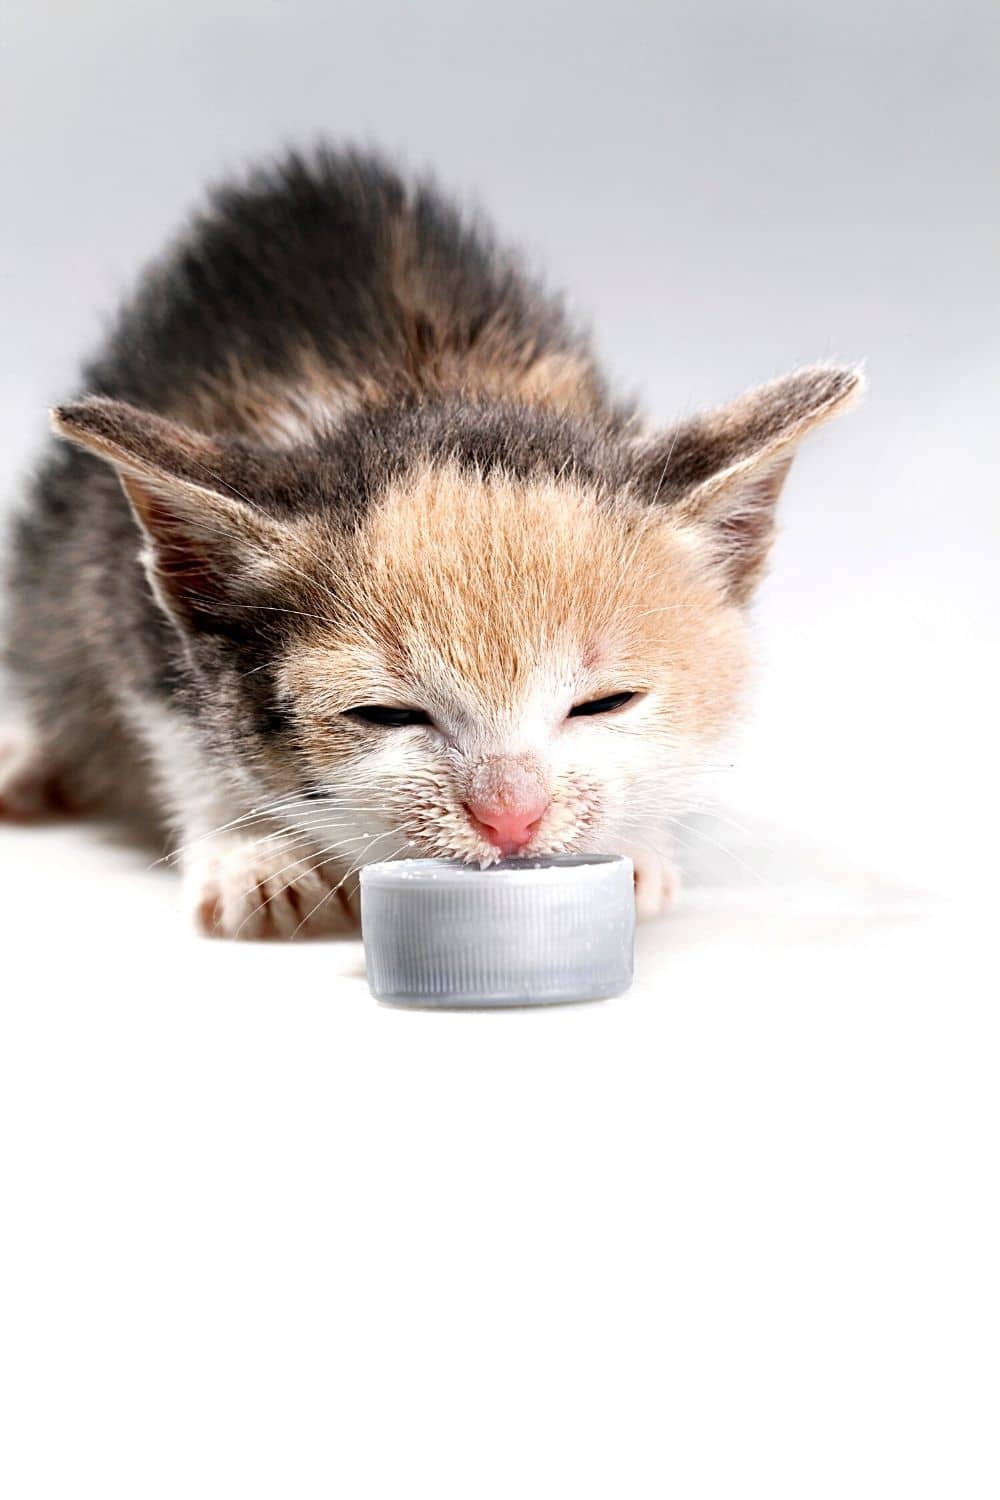 Milk serves as cats' comfort food as it brings memories of when they're still kittens